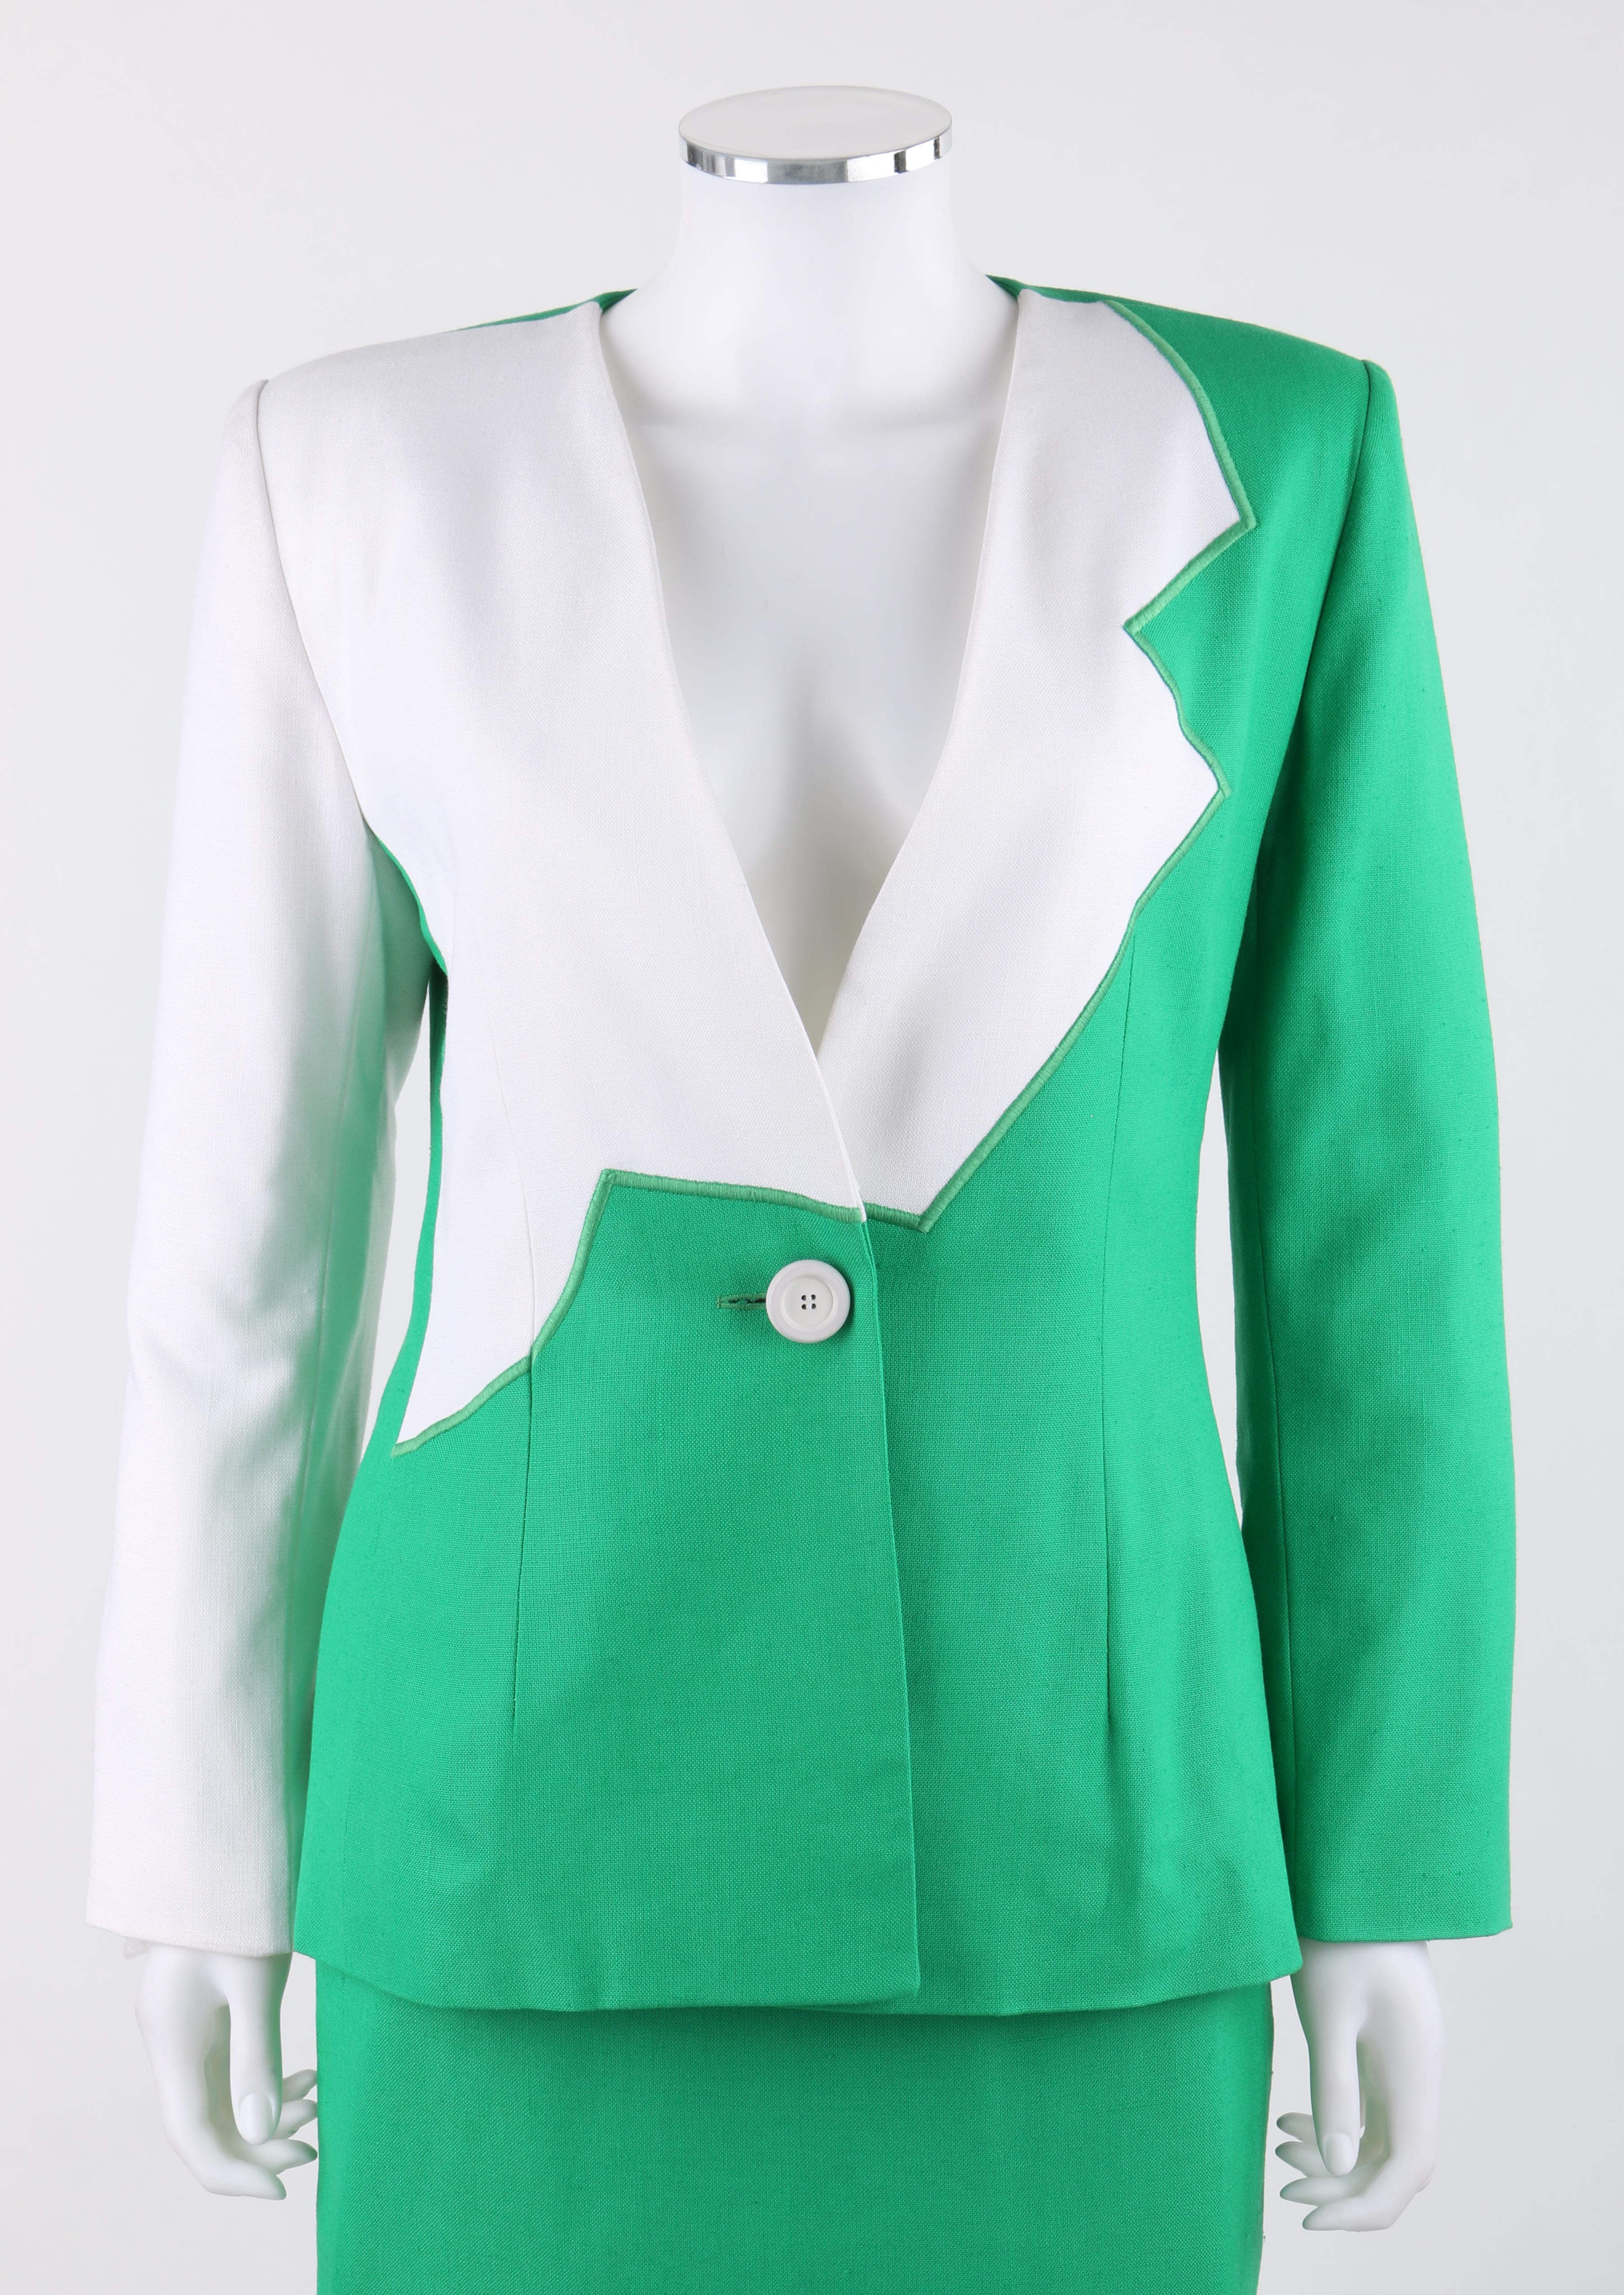 GIVENCHY S/S 1998 ALEXANDER McQUEEN 2pc Green Asymmetric Panel Skirt Suit Set
  
Brand / Manufacturer: Givenchy
Collection: Spring / Summer 1998
Designer: Alexander McQueen
Style: Skirt suit set
Color(s): Shades of bright green (blazer & skirt